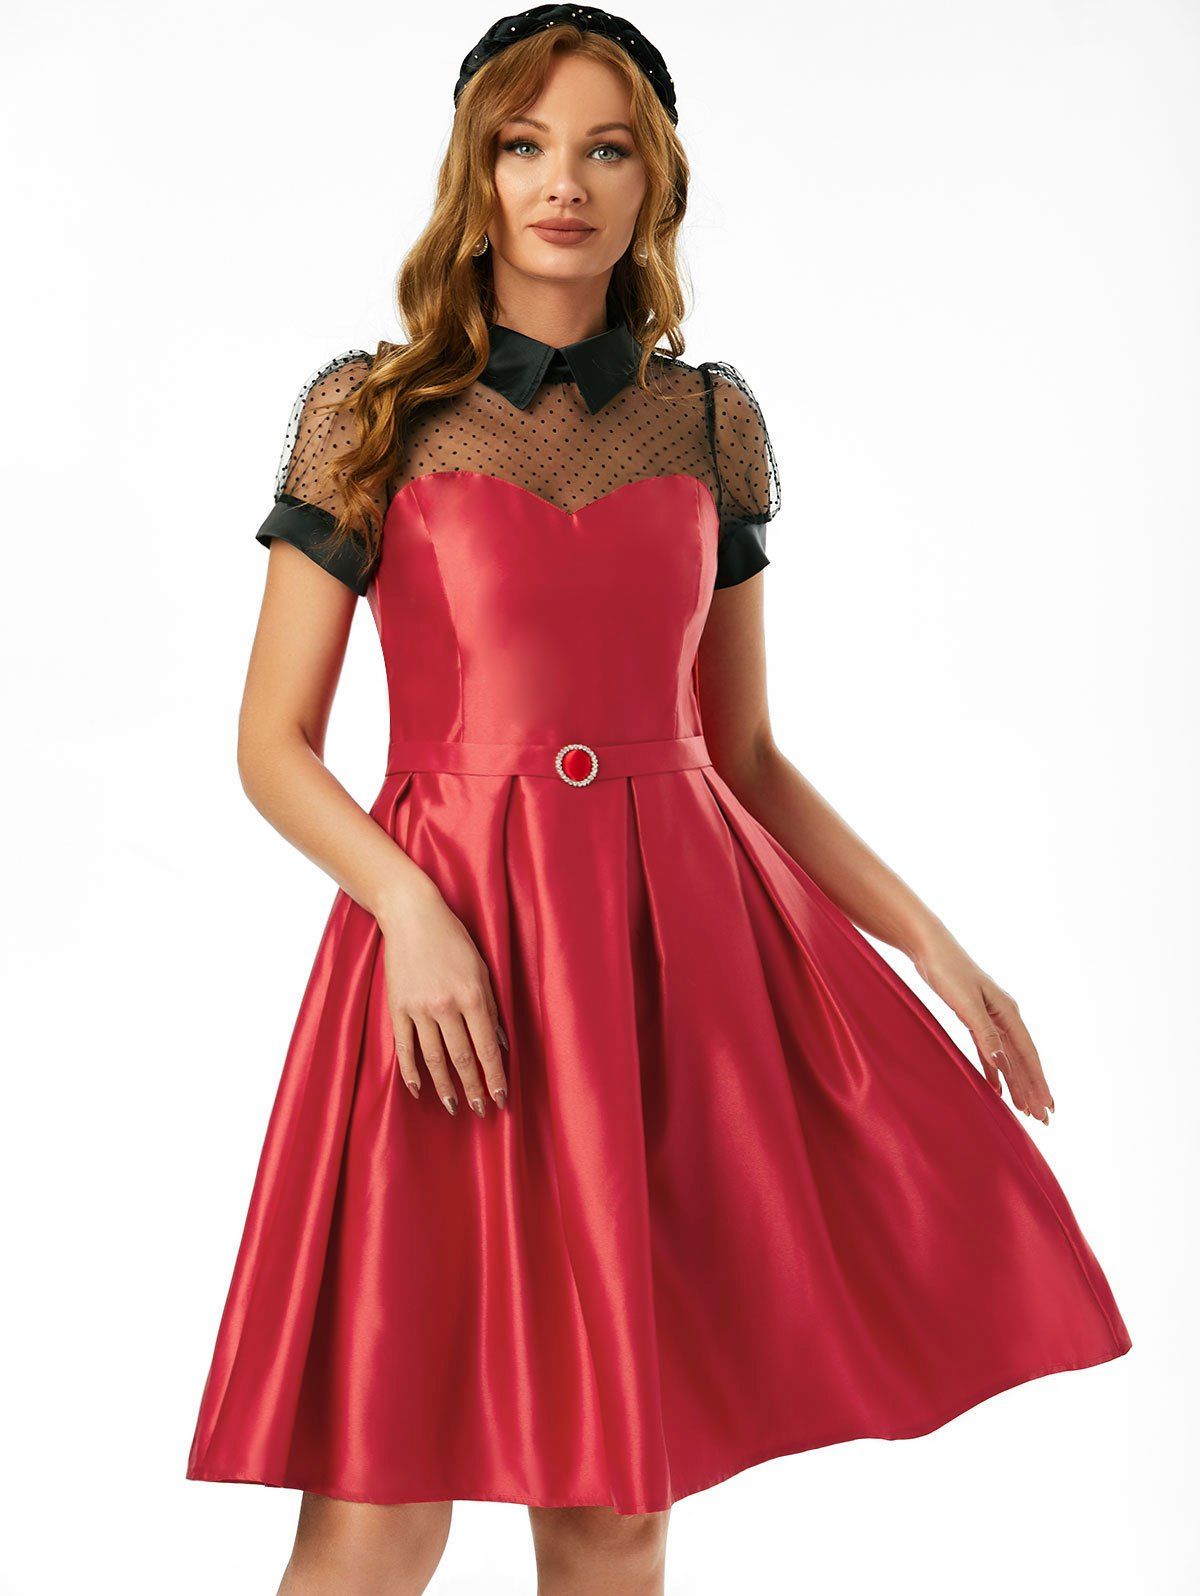 Mesh Insert Belted Prom Dress - RED XL